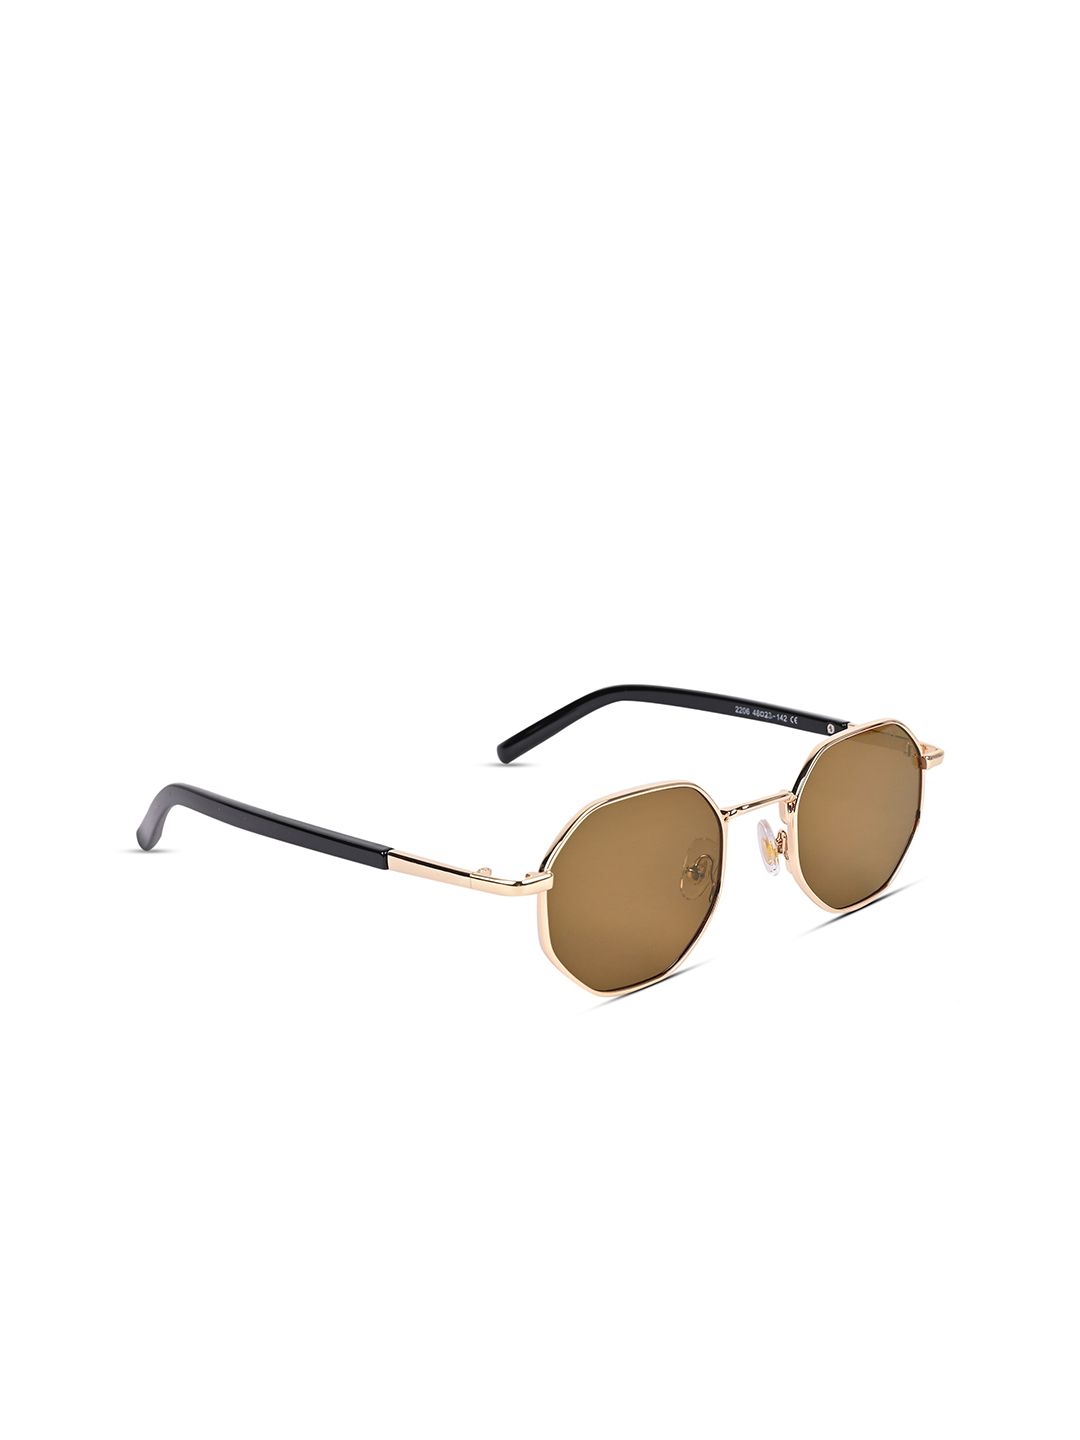 Voyage Unisex Brown Lens & Gold-Toned Round Sunglasses with UV Protected Lens Price in India